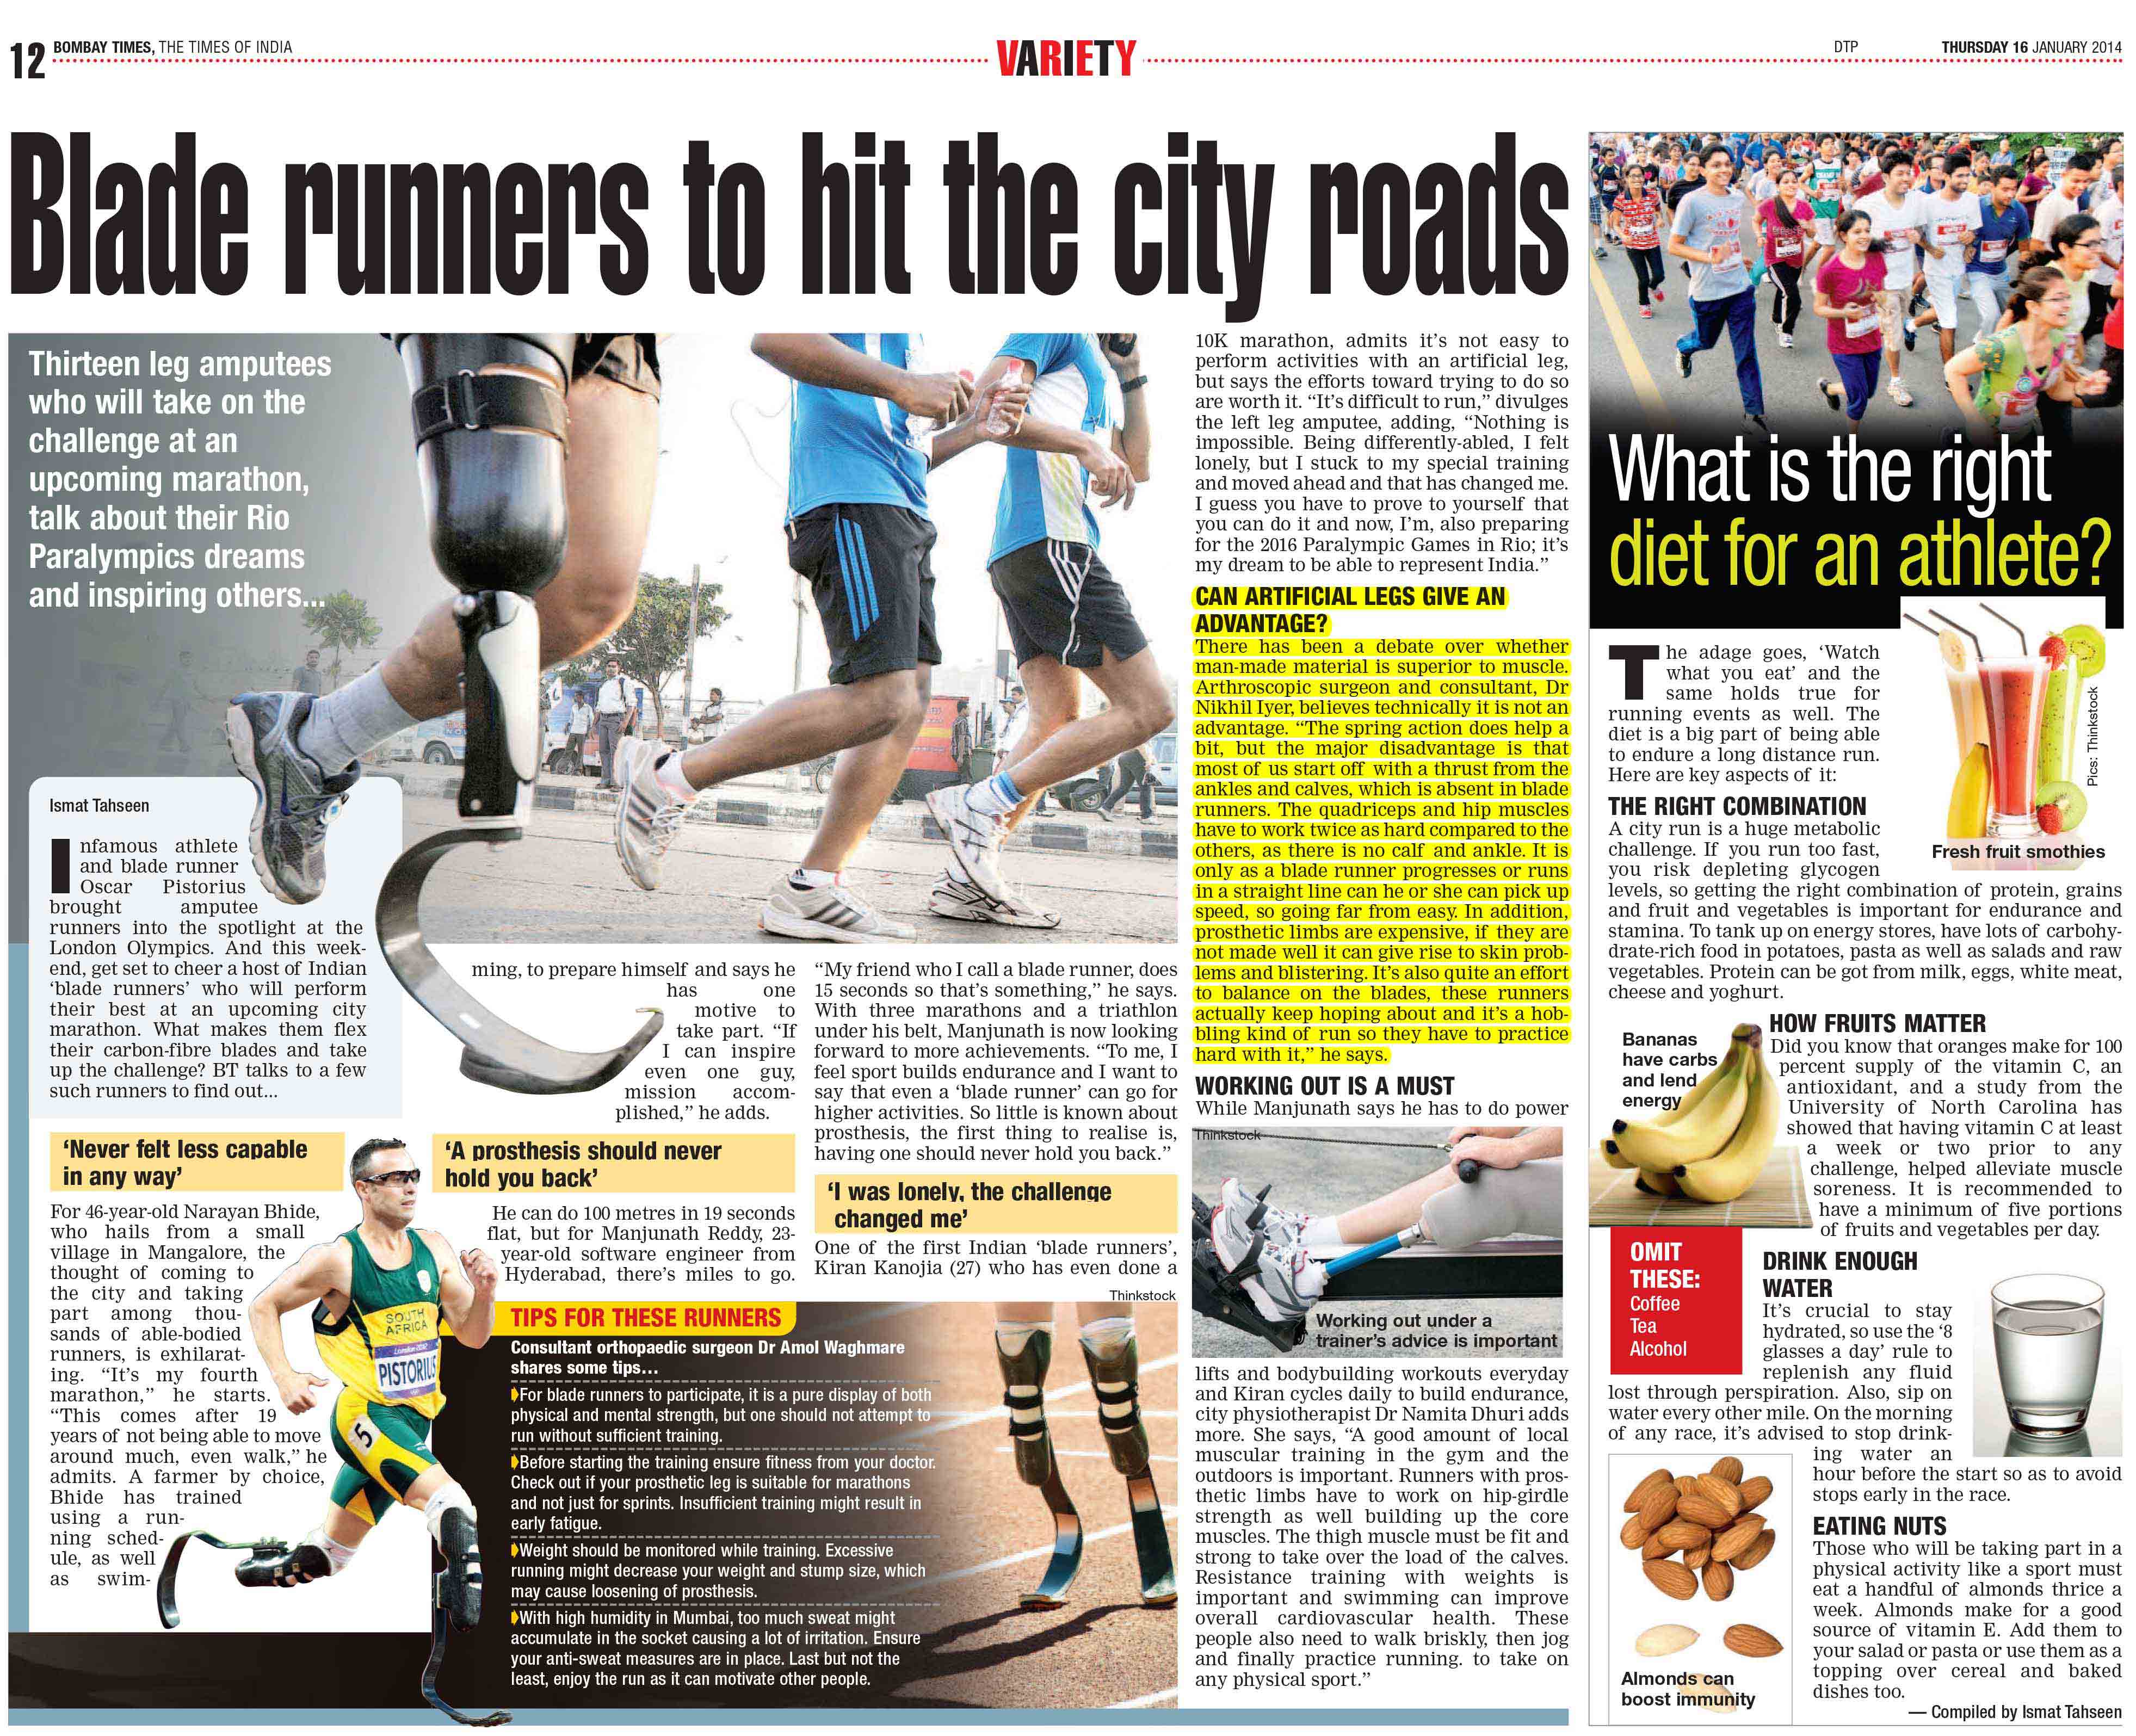 blade runners to hit the city roads - bombay times